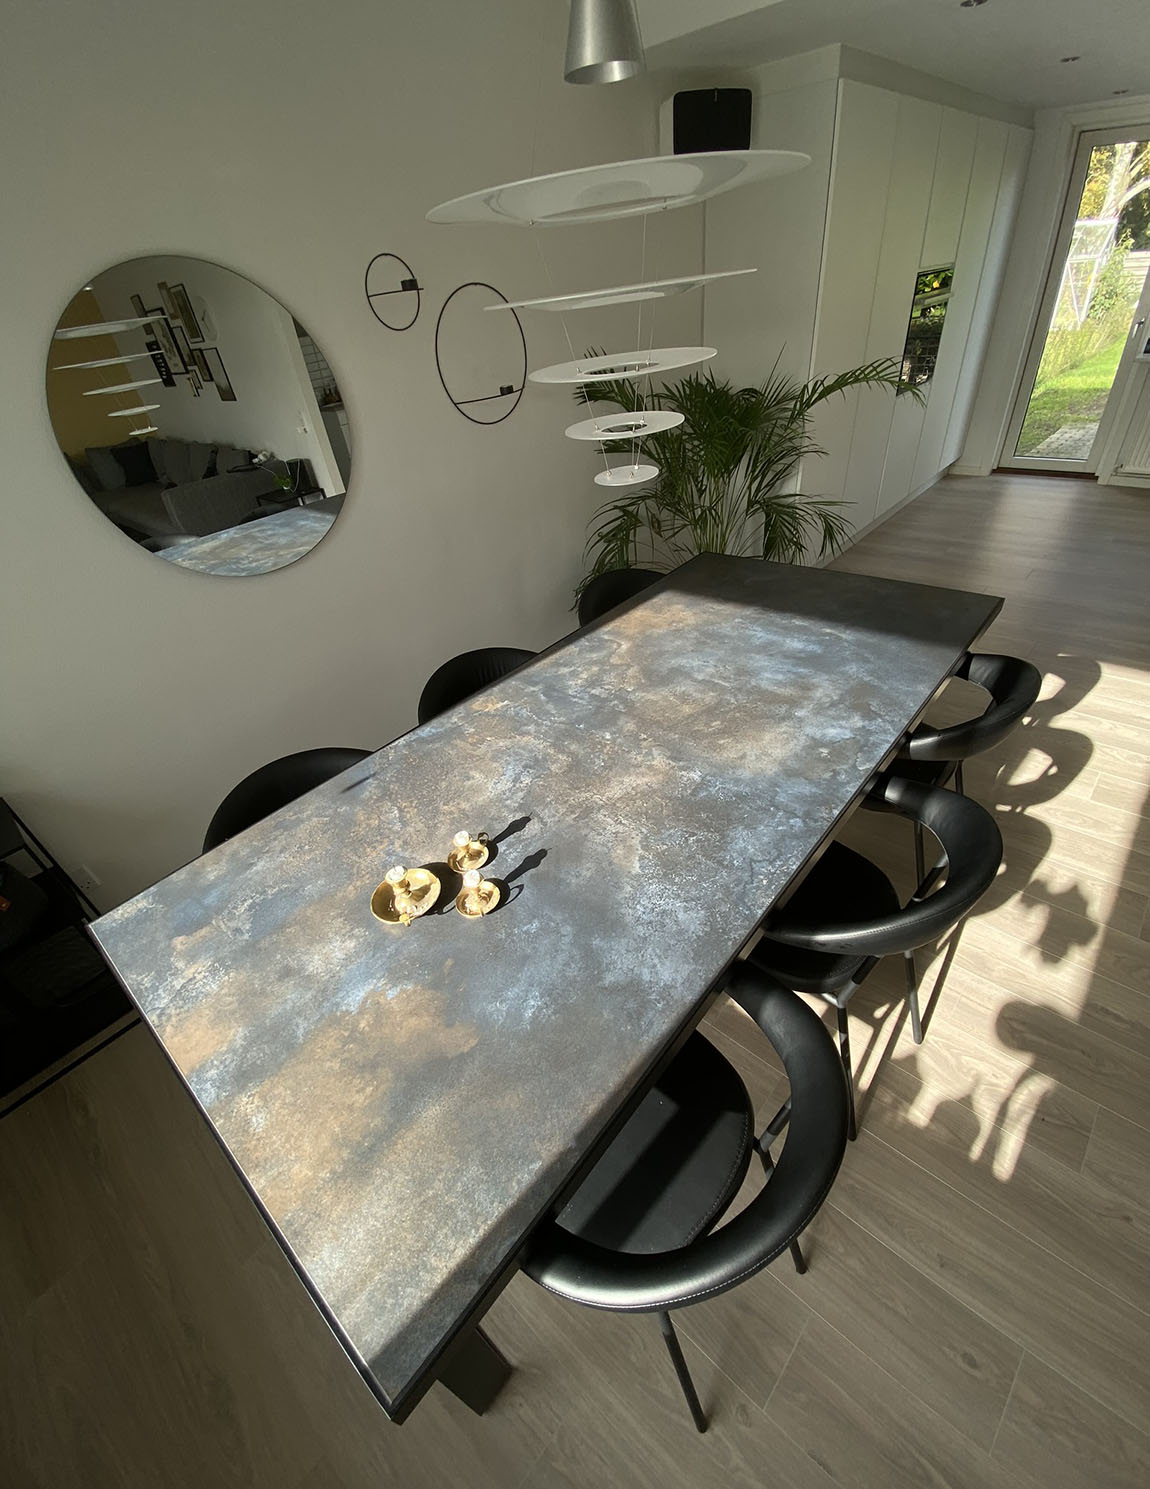 KK-DesignDenmark: Solid style is on the table